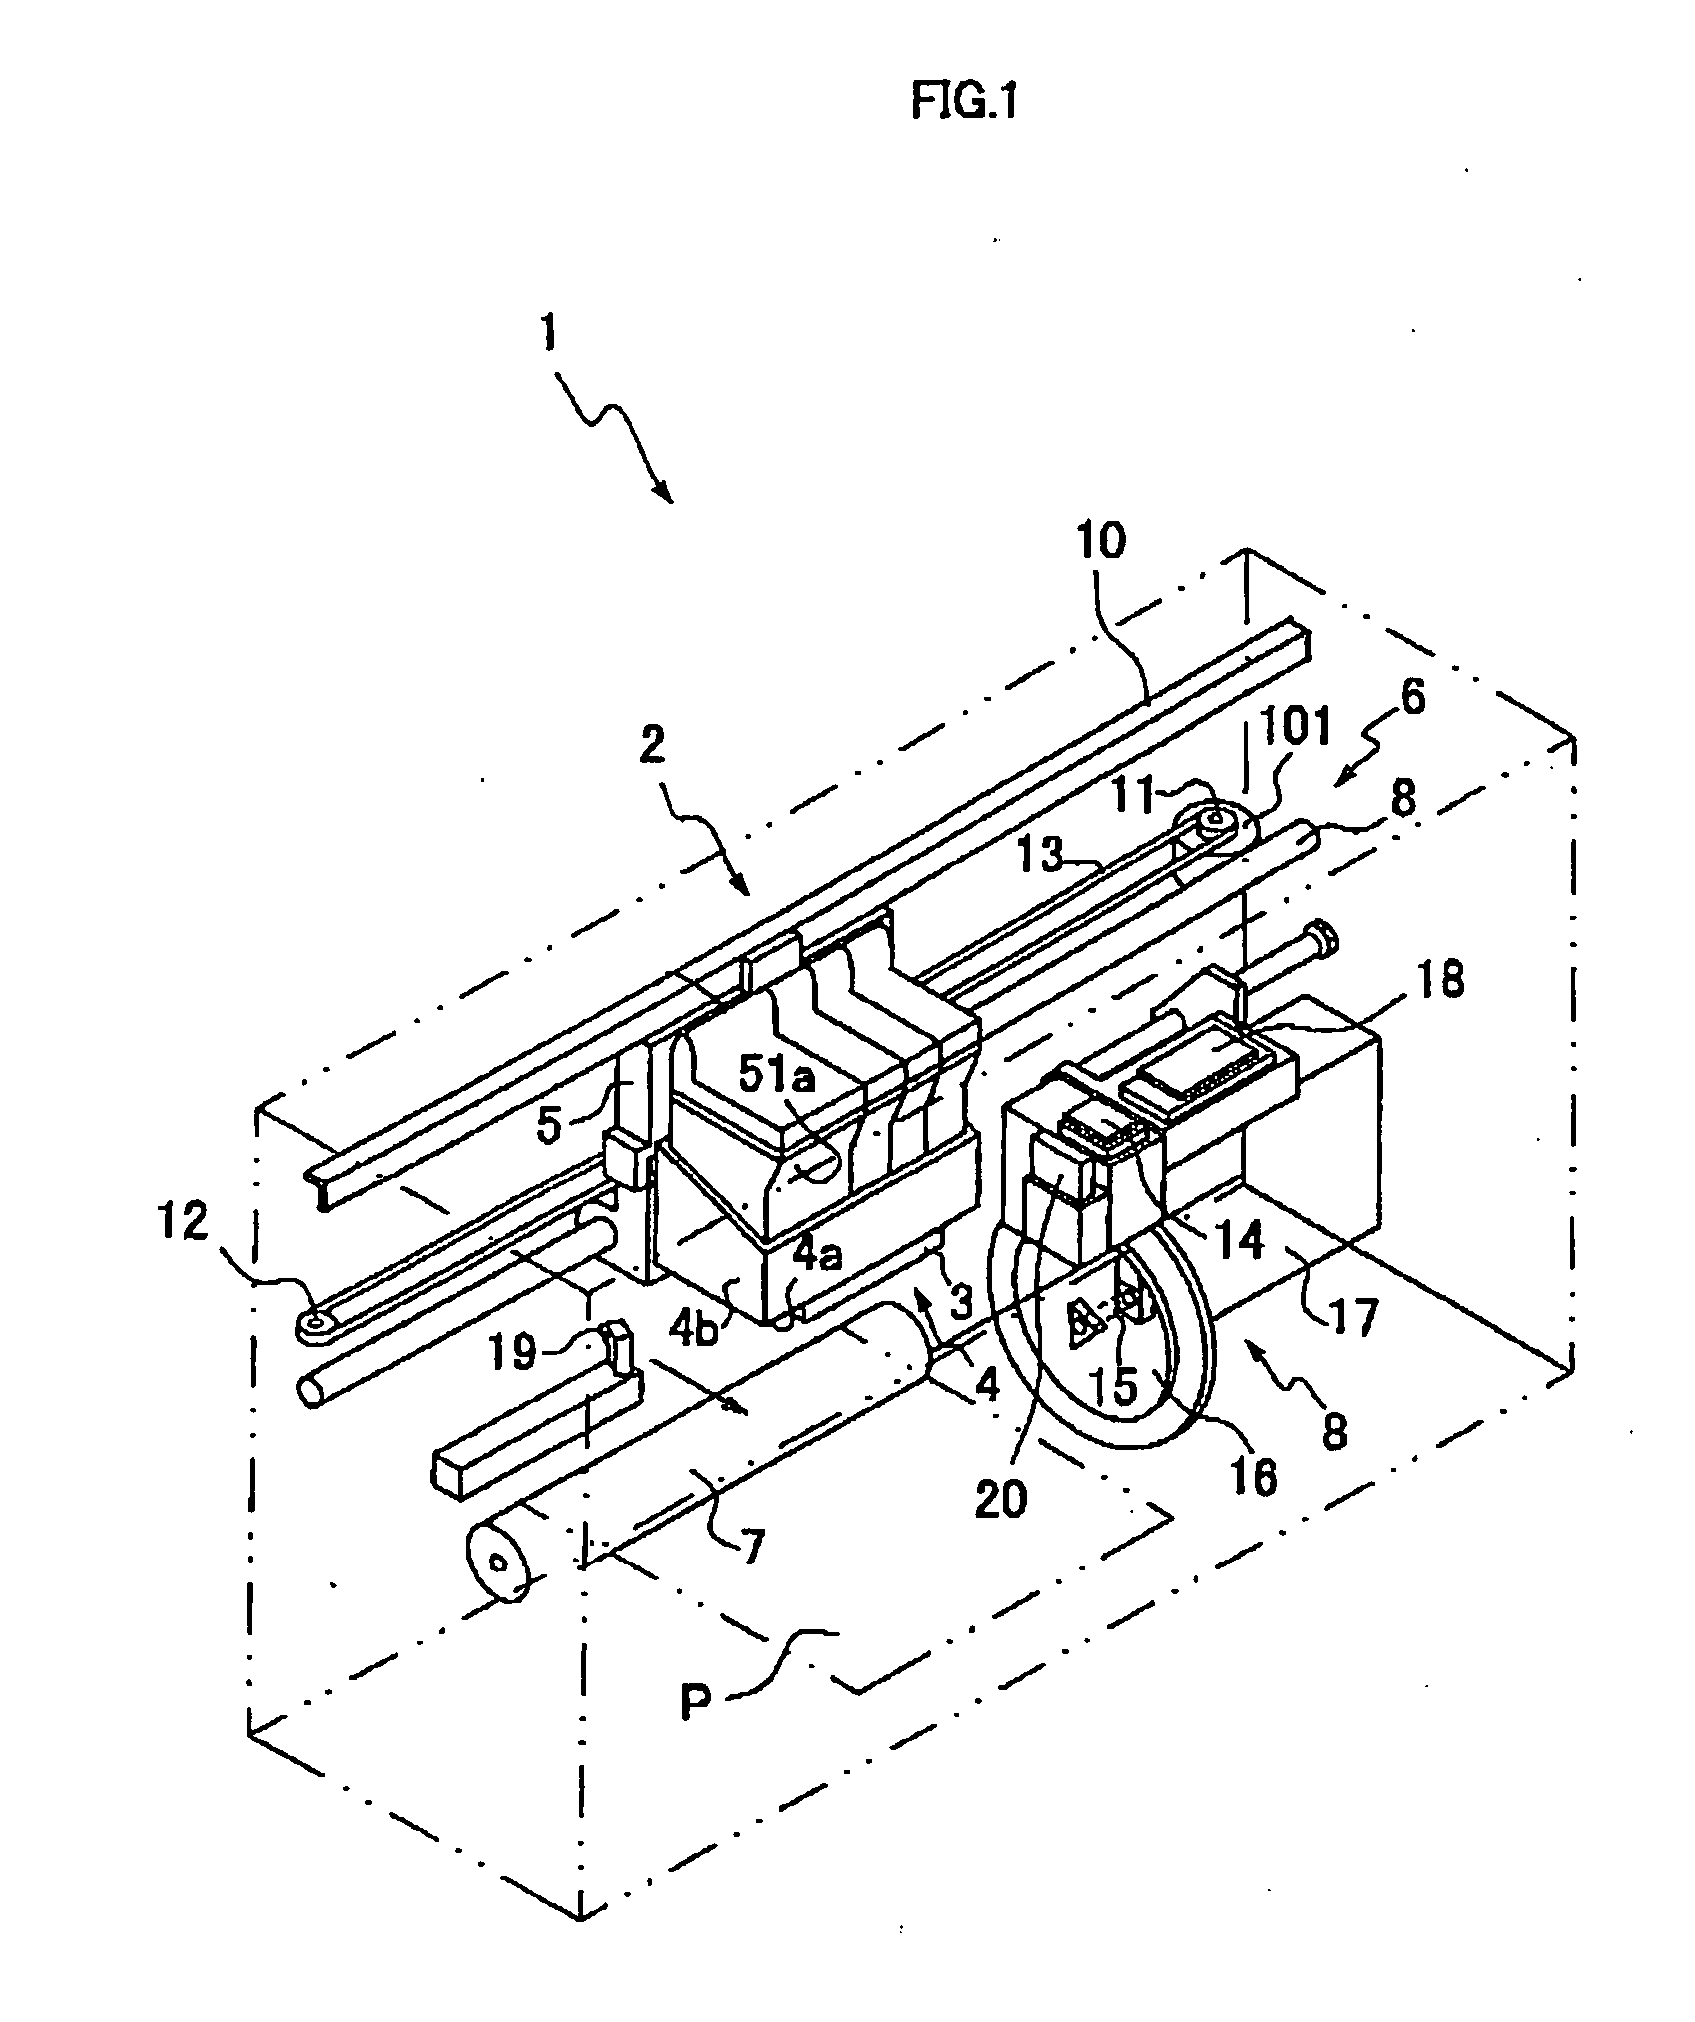 Ink cartridge, detection device for cartridge identification and ink level detection, and image formation apparatus comprising thereof